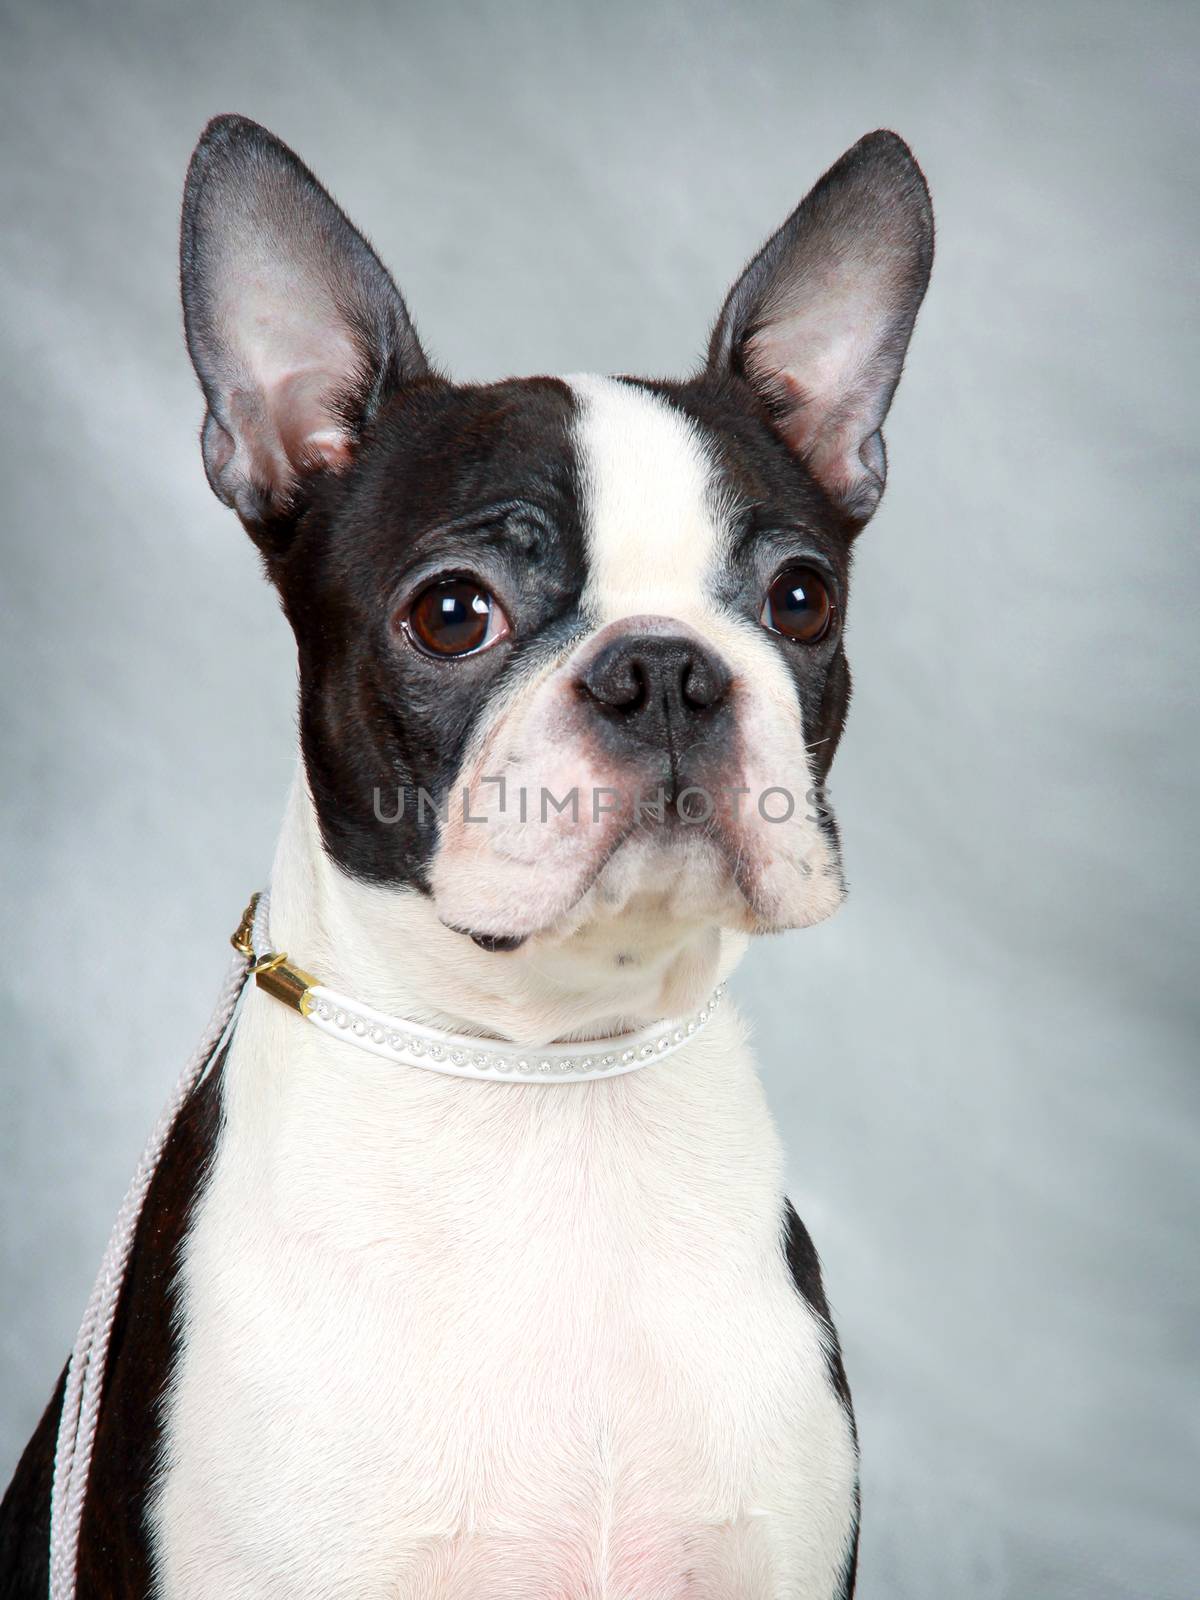 Close-up portrait of a Boston Terrier in a white collar by SuperJStus